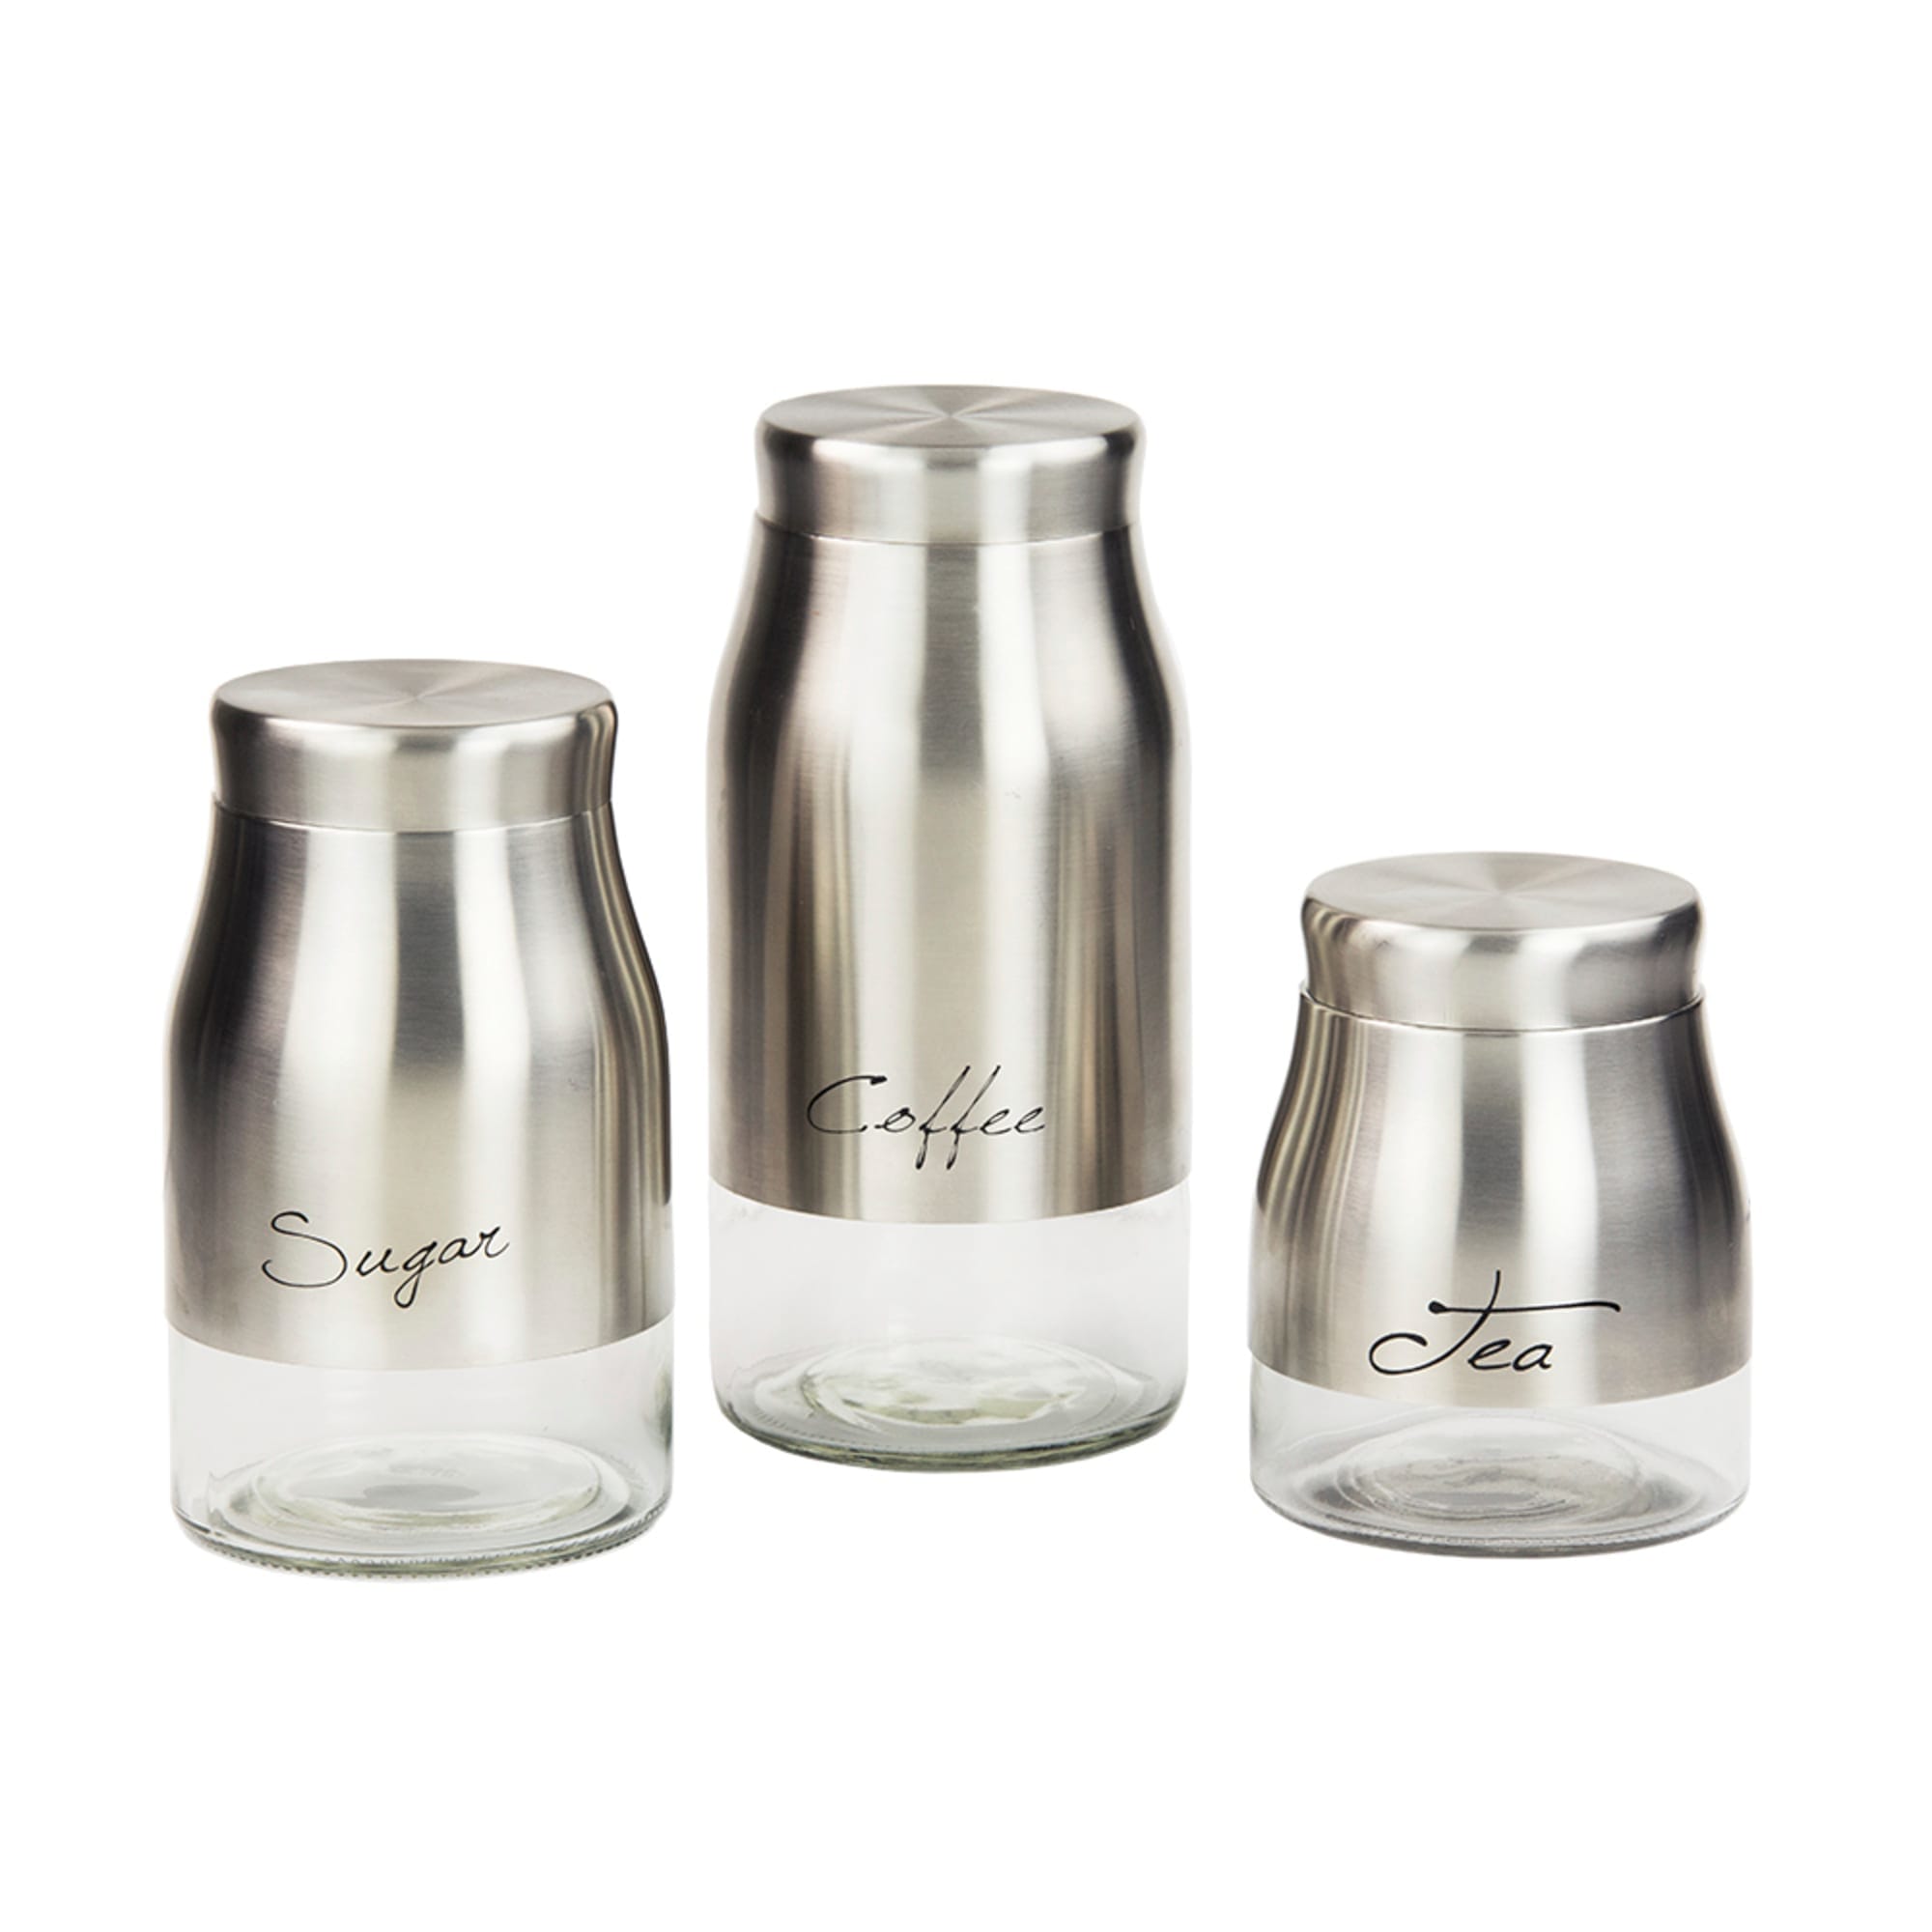 Home Basics 3 Piece Stainless Steel Canister Set with See-Through Glass Base, Silver $16.00 EACH, CASE PACK OF 4